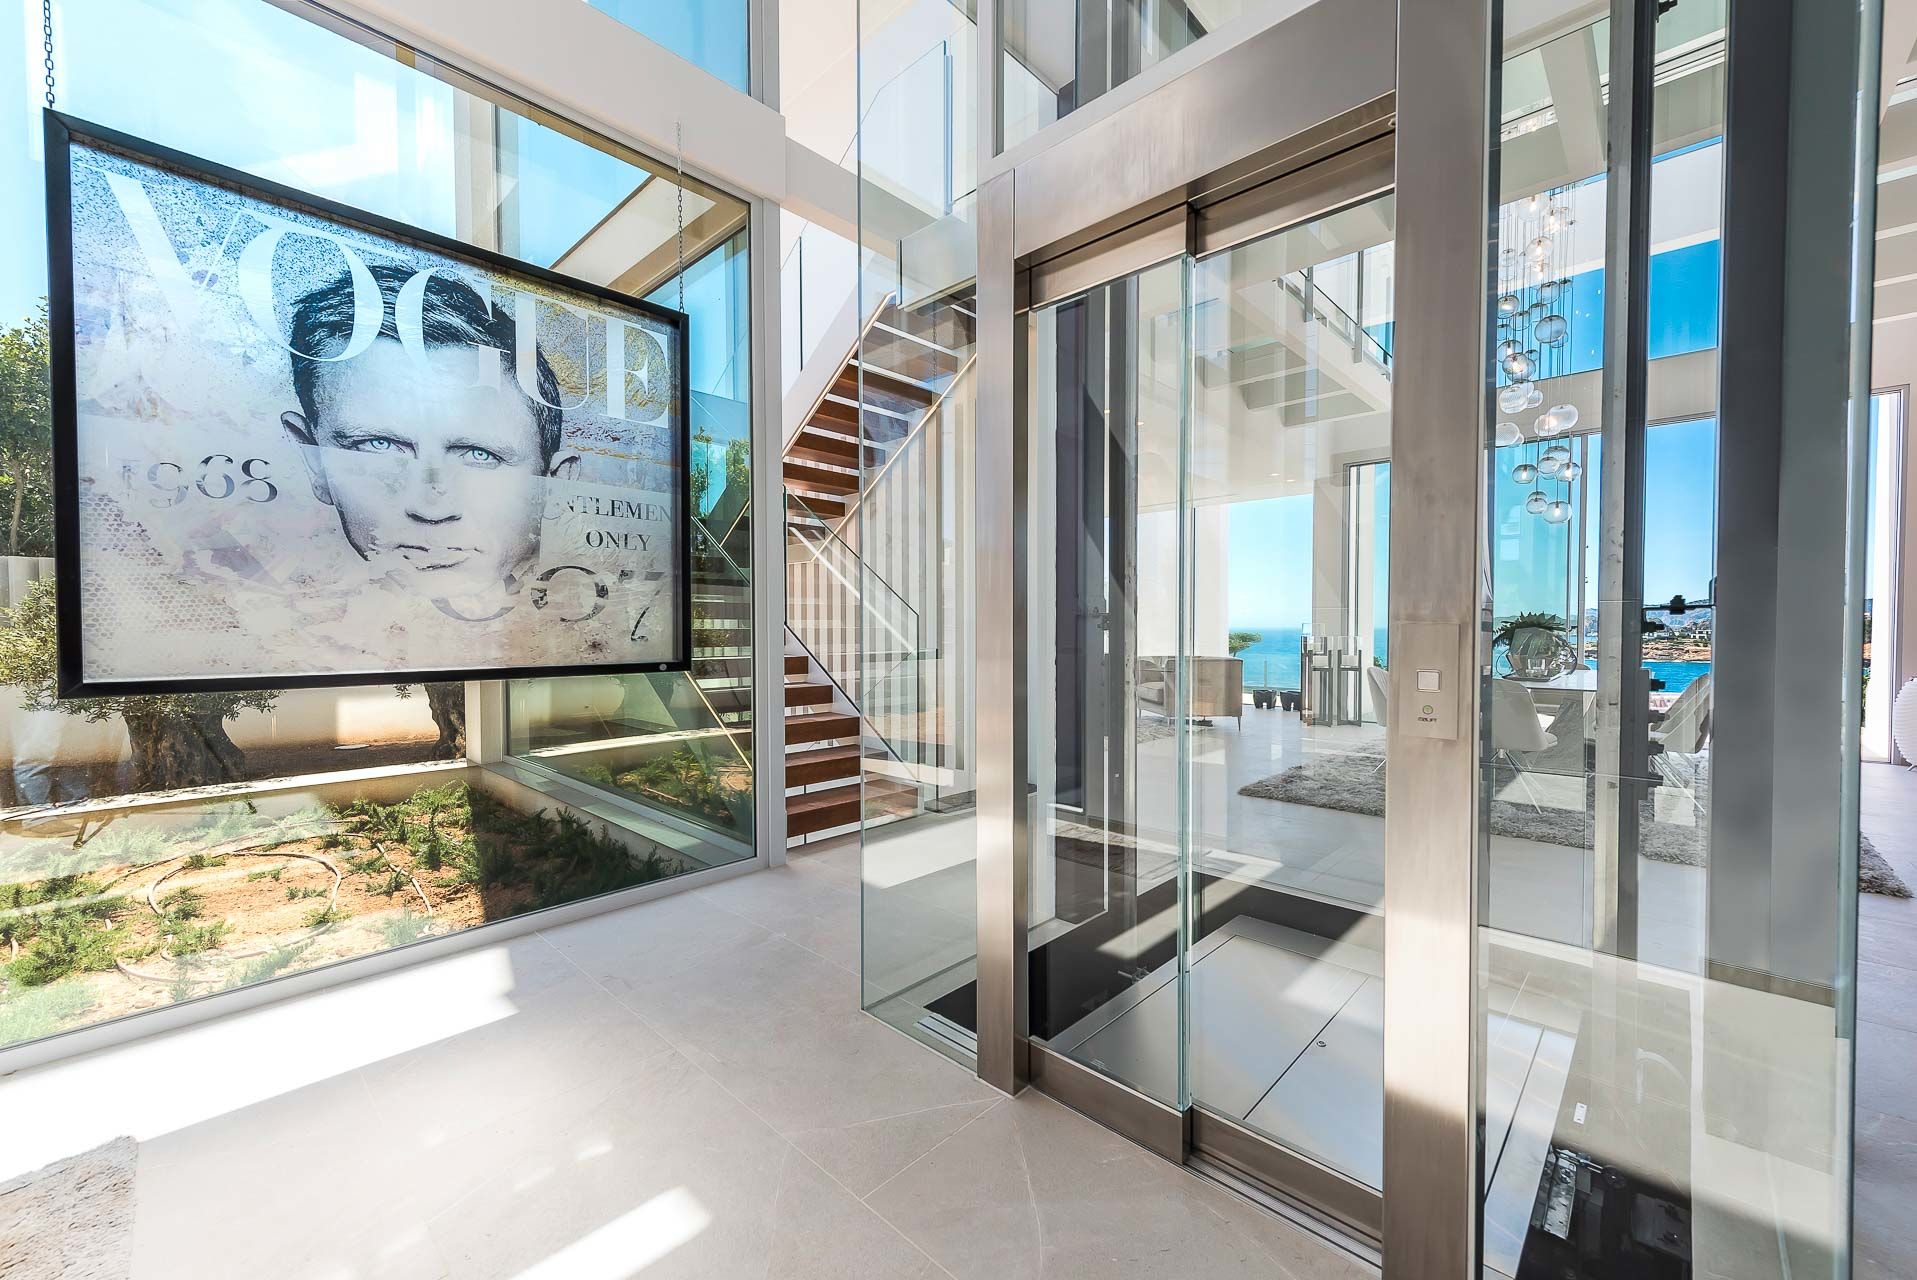 Luxurious new built front line villa - Entrance area with glass elevator